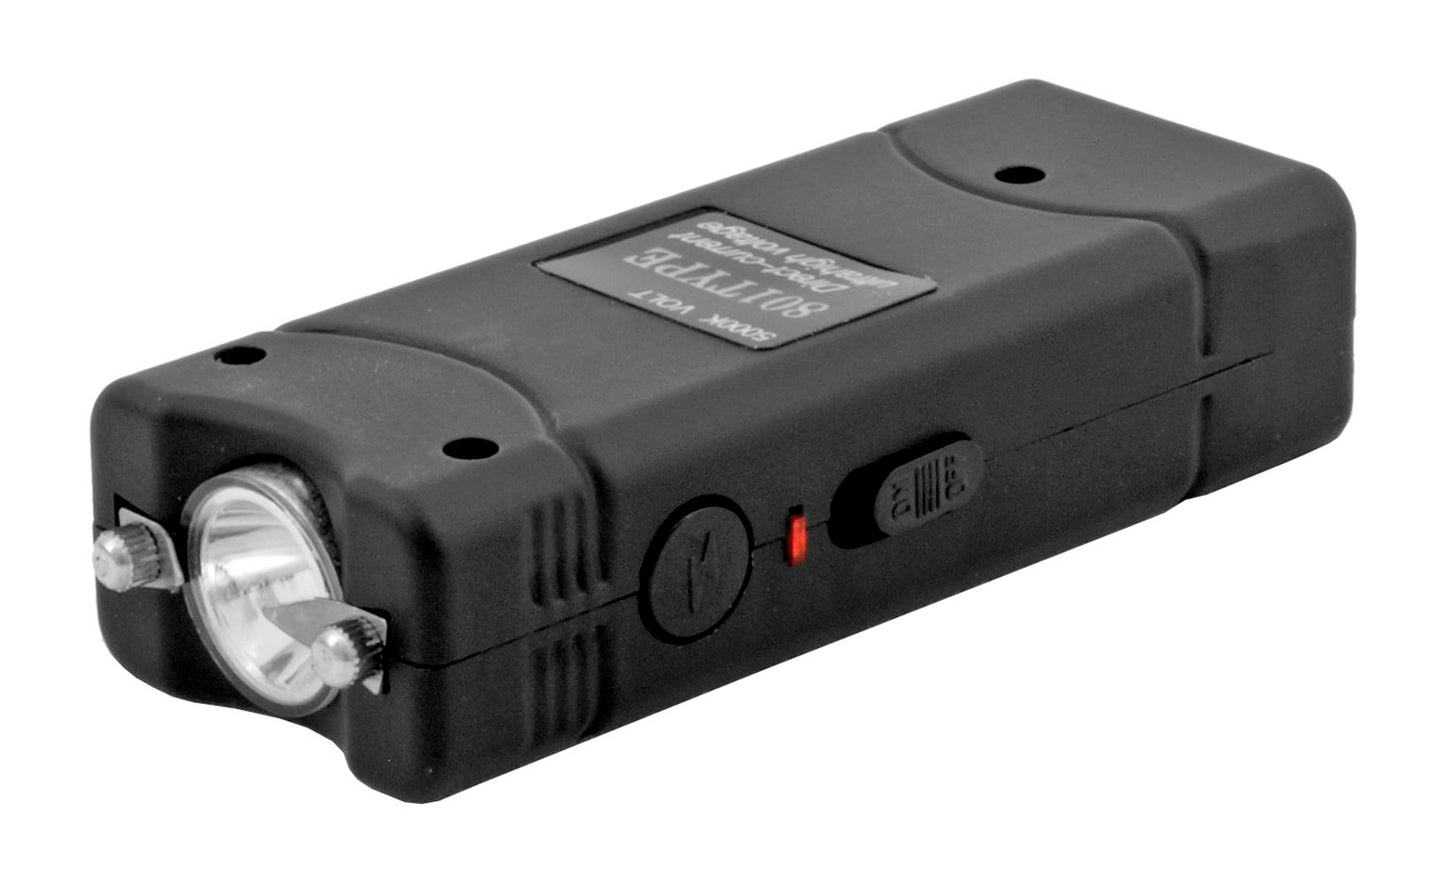 Small Compact Rechargeable Stun Gun with Flashlight (multiple colors)